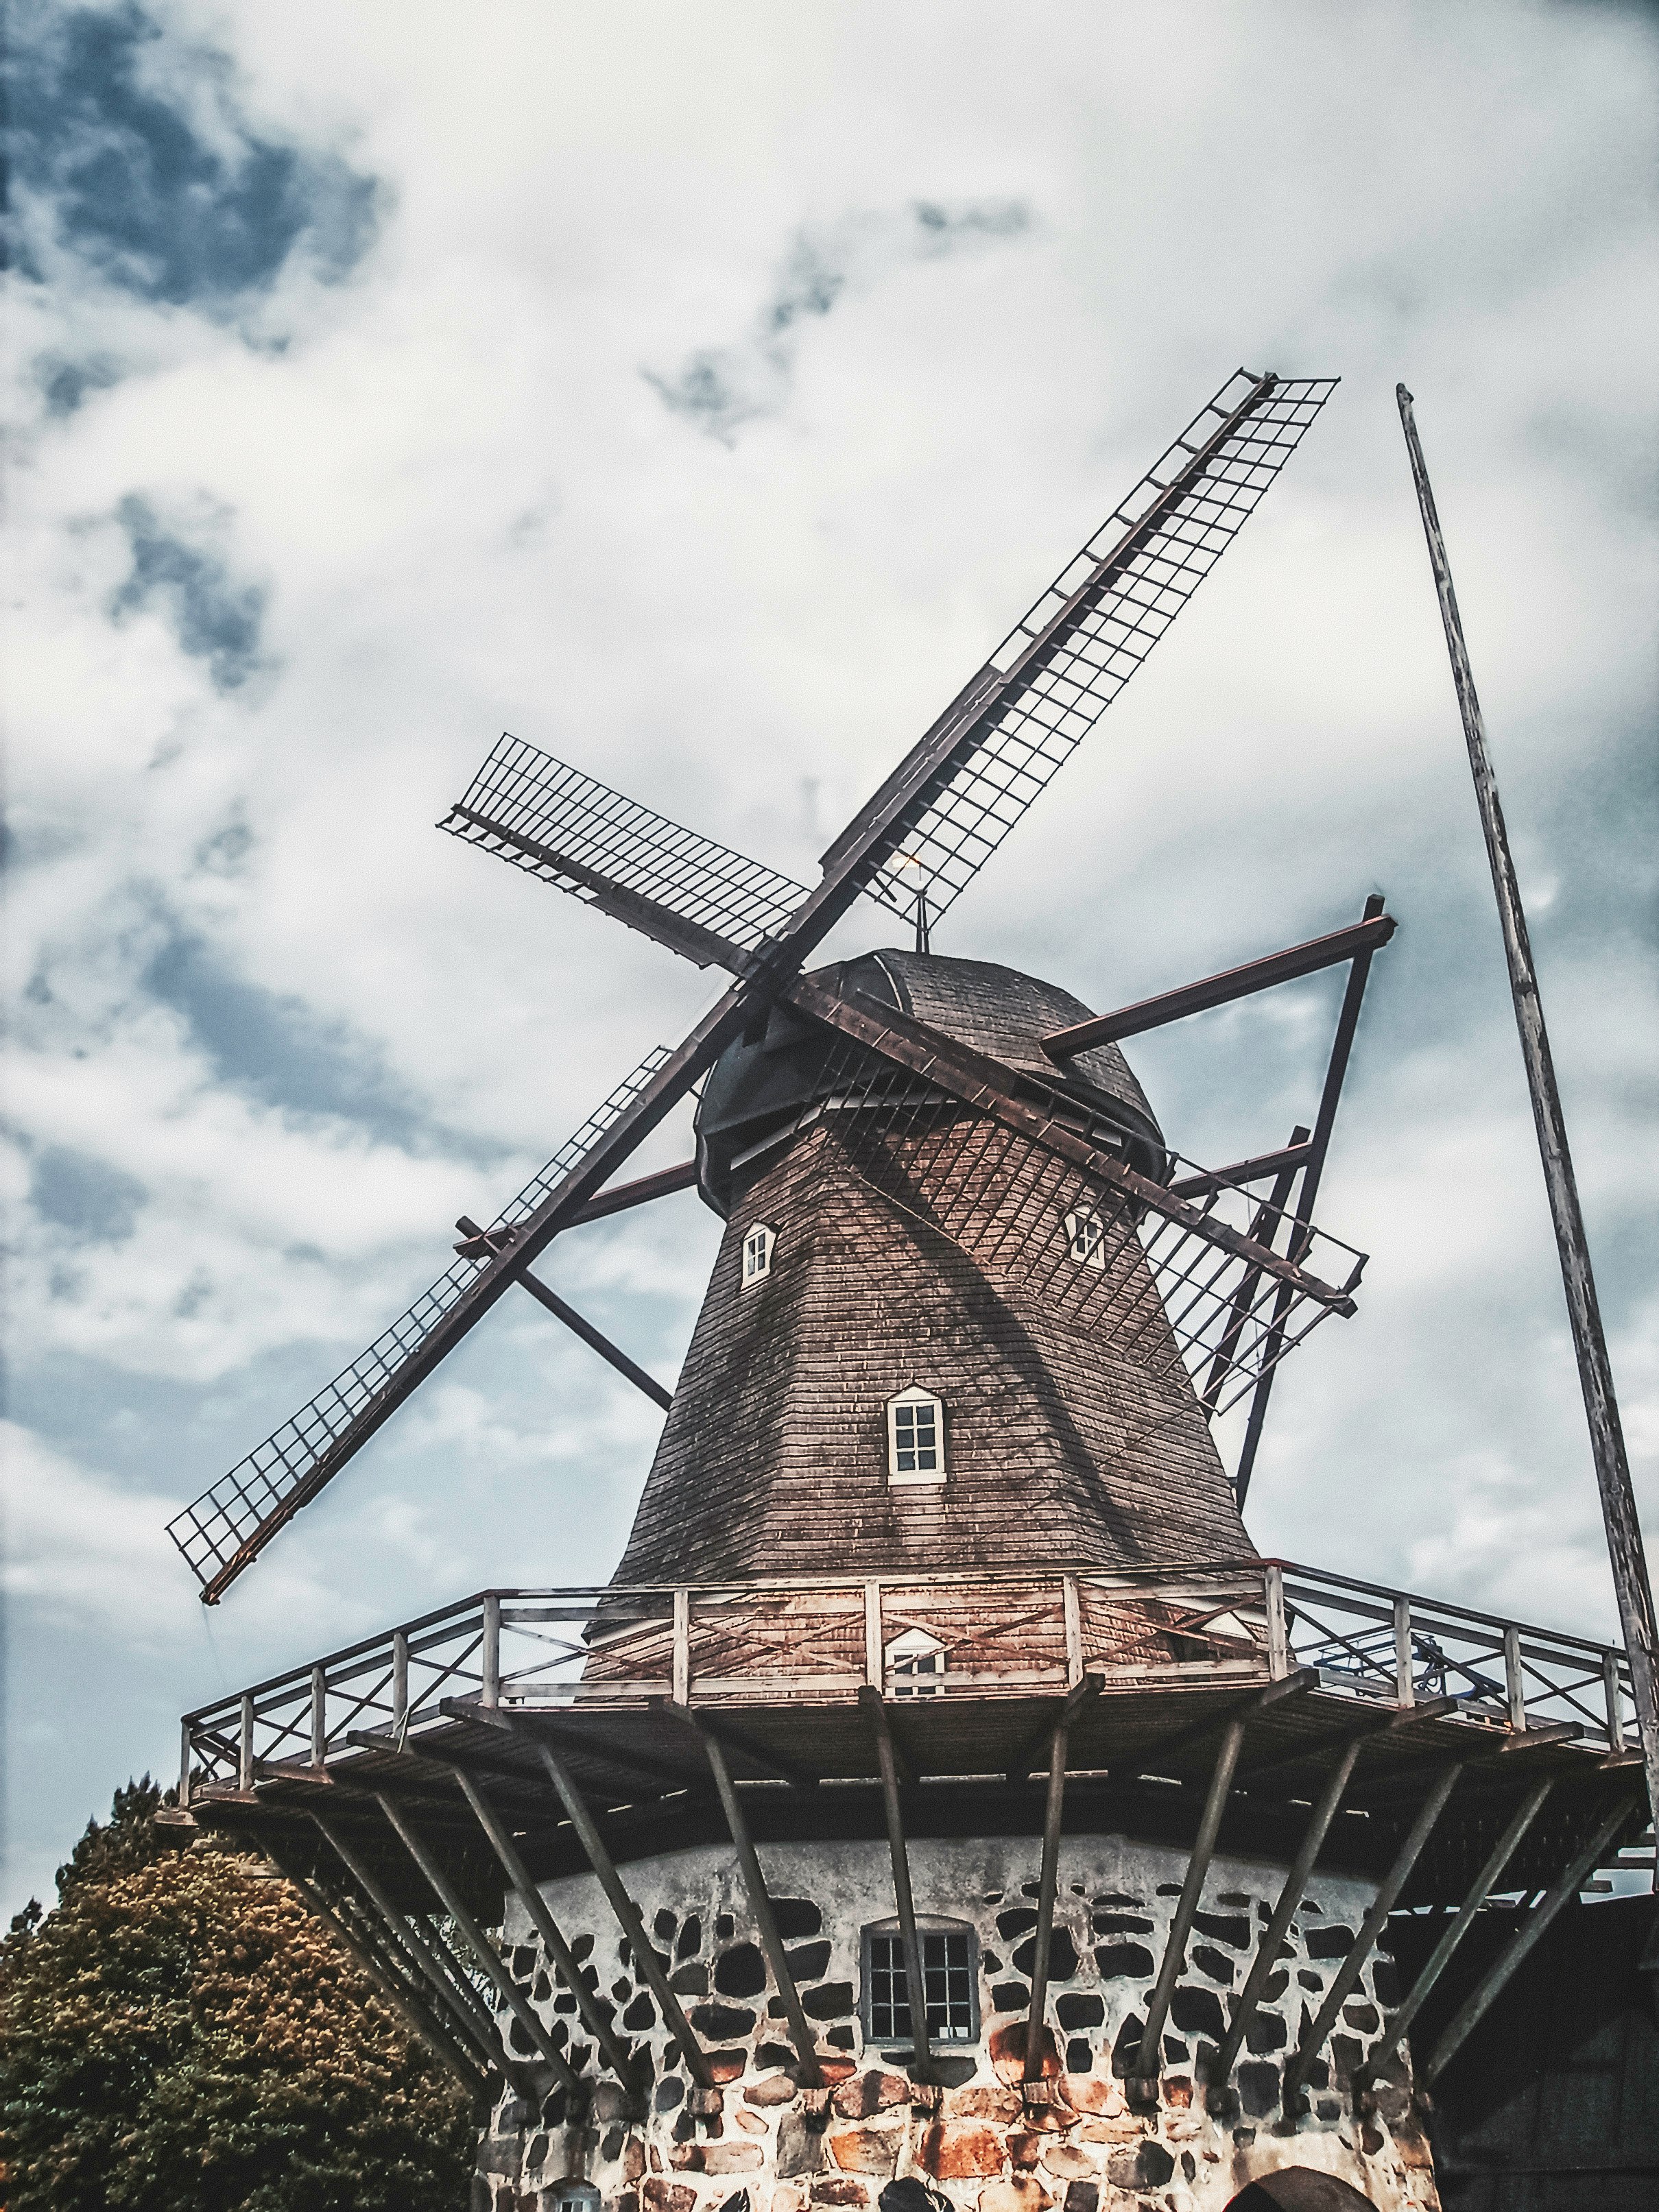 brown and black windmill under white clouds and blue sky during daytime